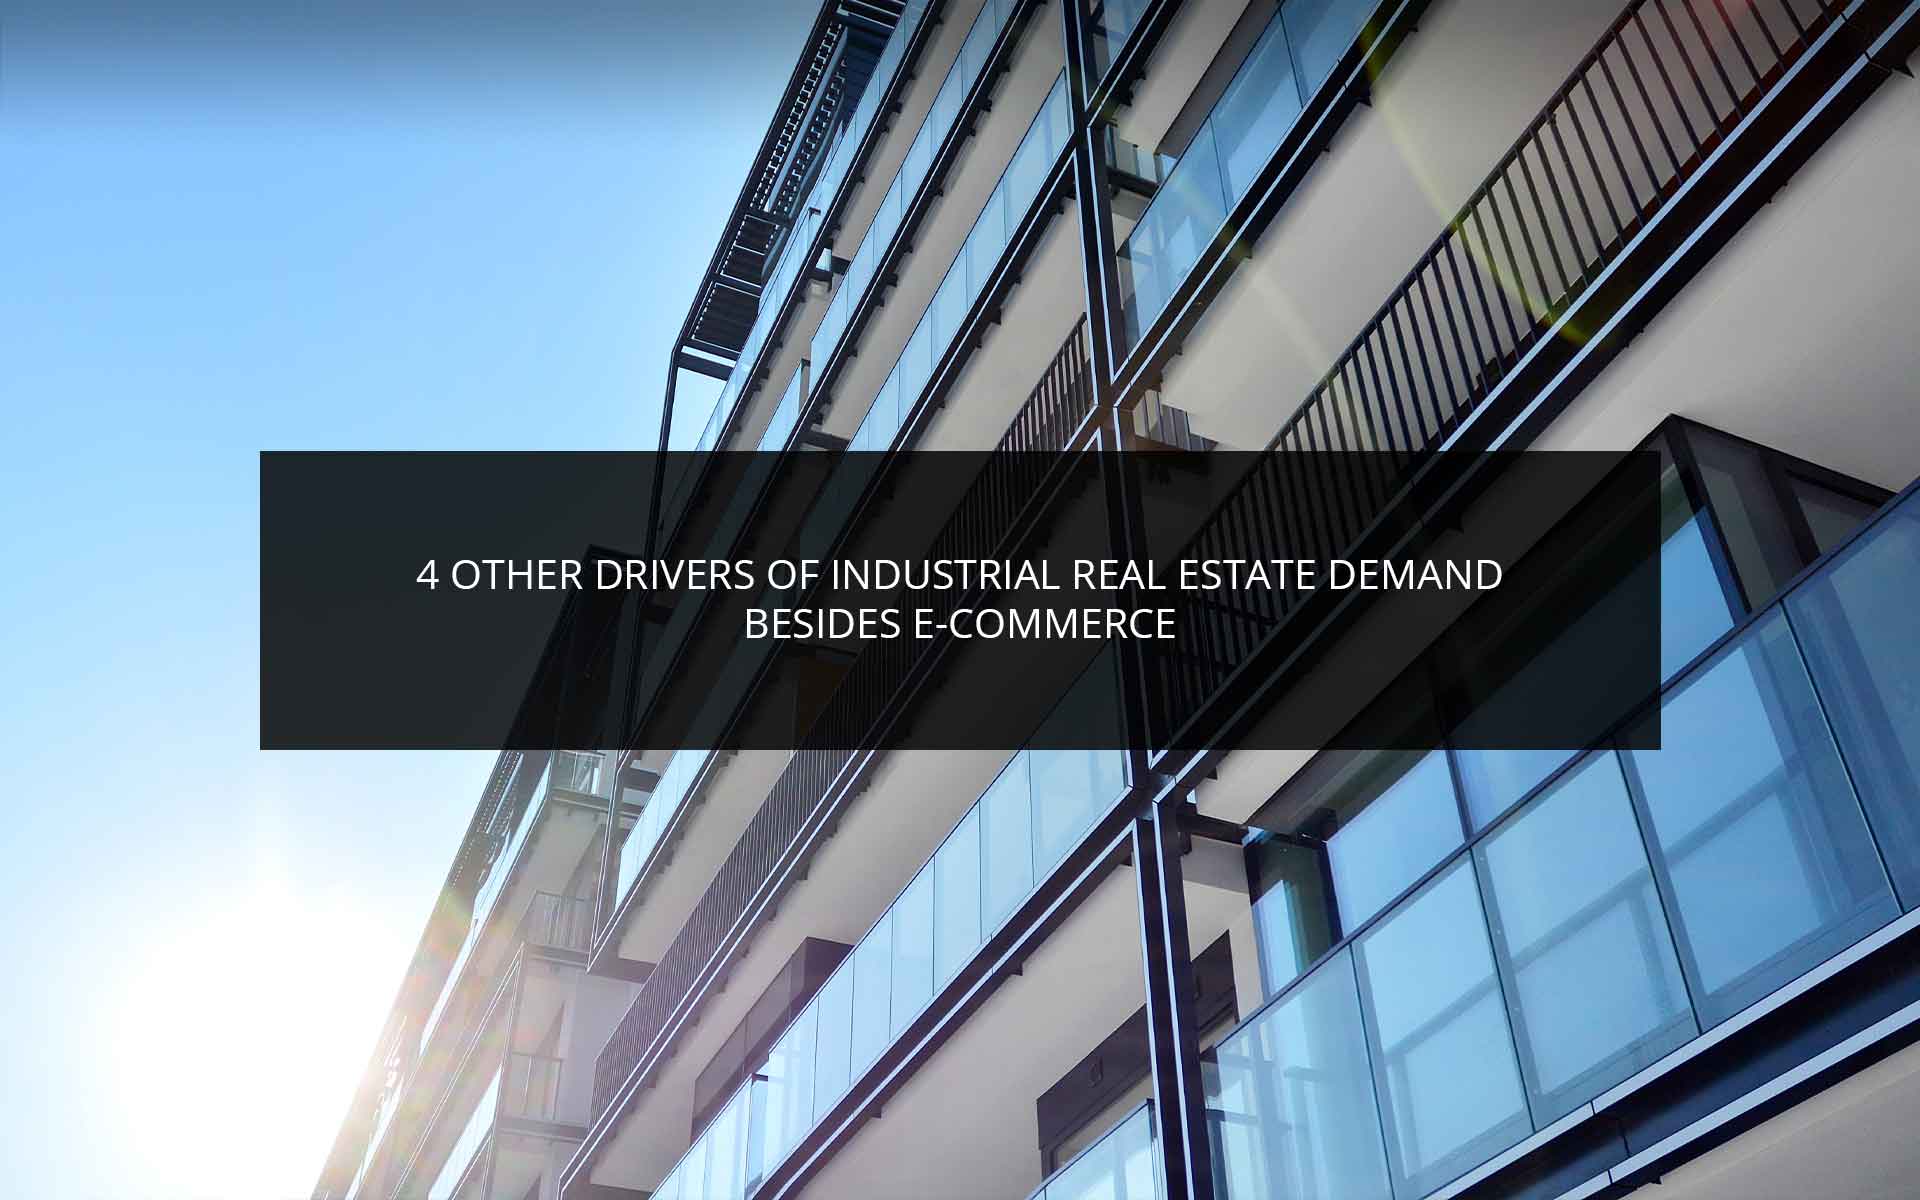 4 Other Drivers of Industrial Real Estate Demand Besides E-commerce | Phoenix Investors